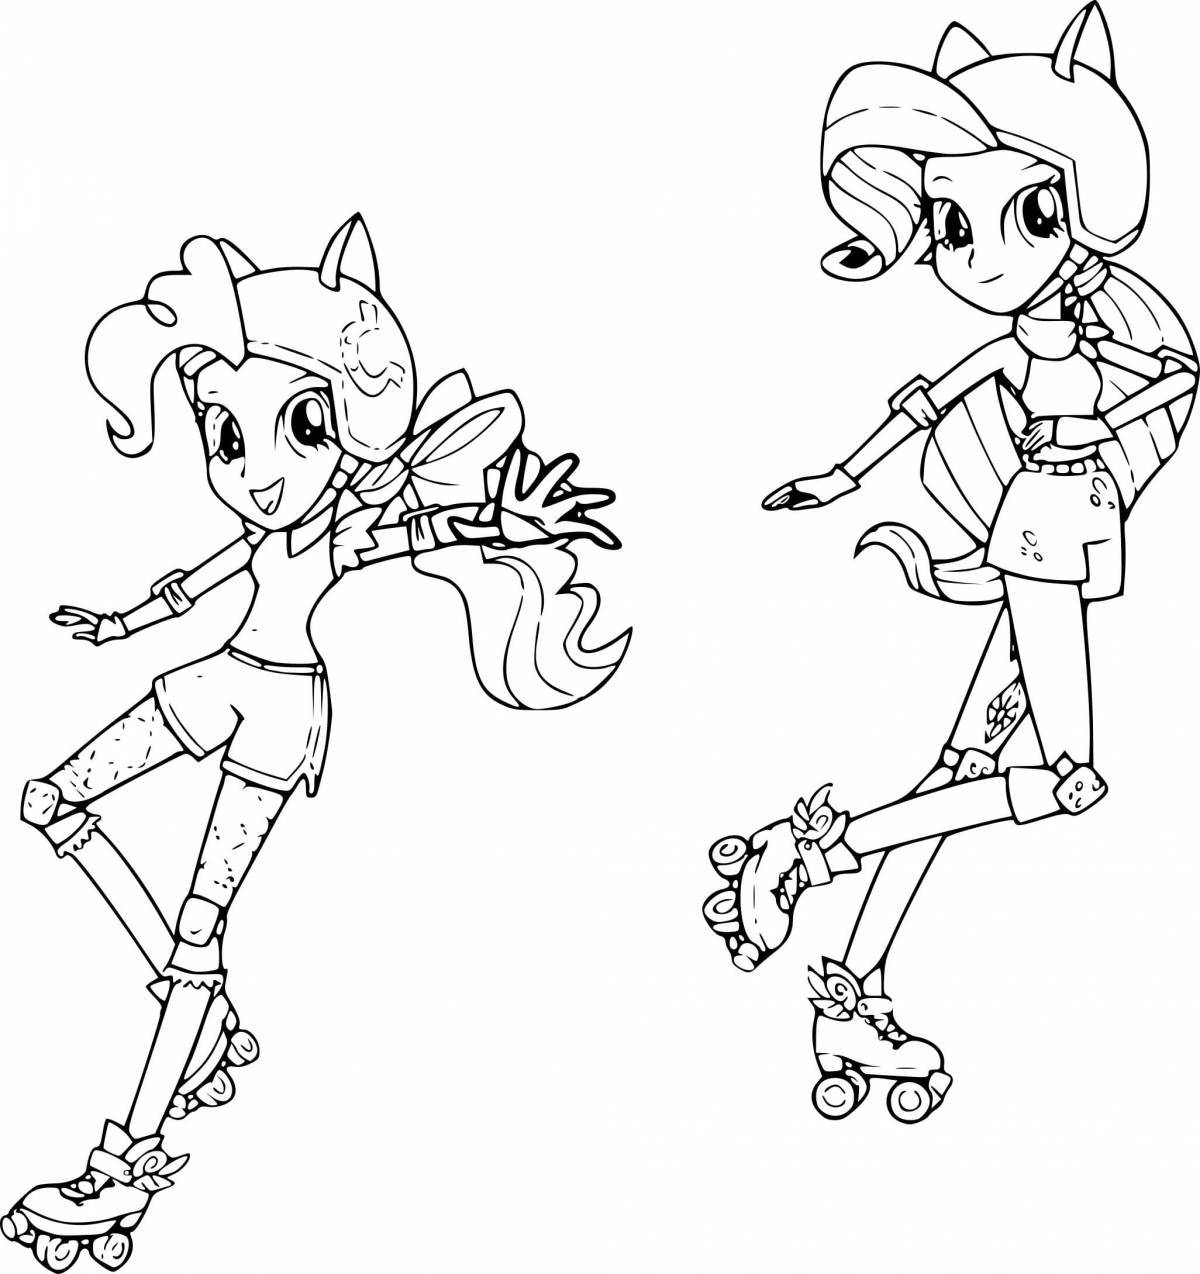 Equestria glamor girls coloring page